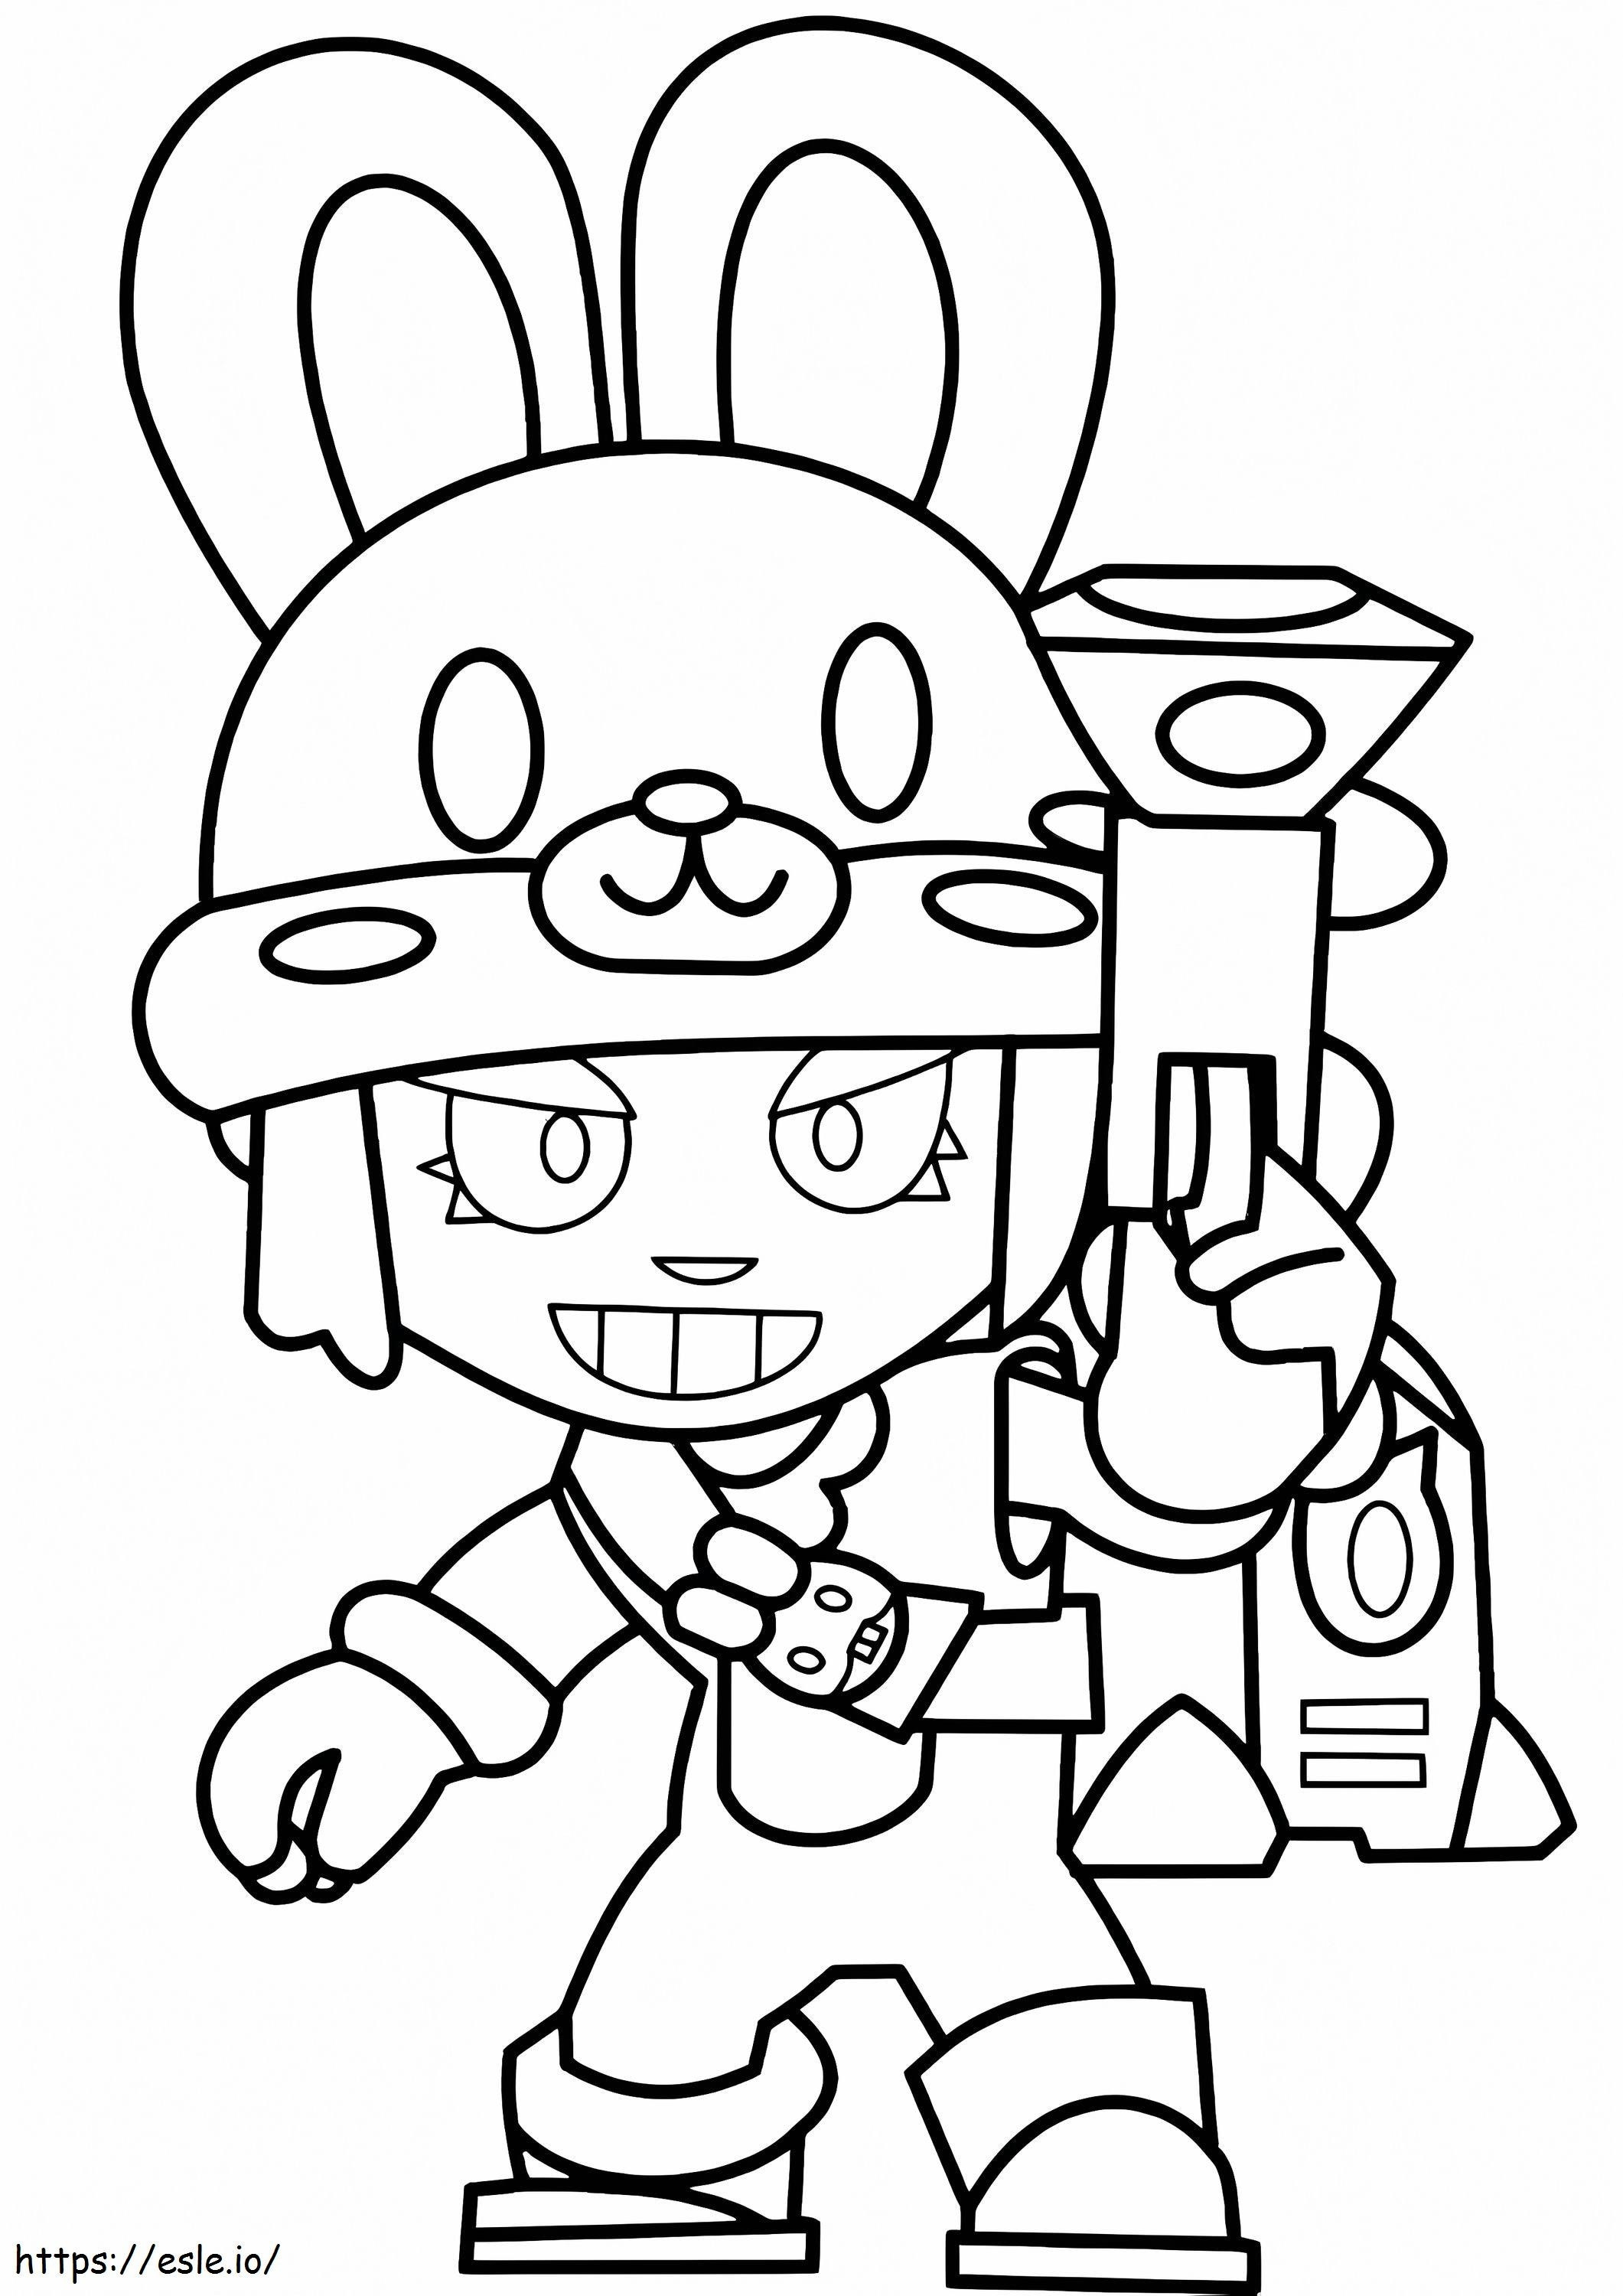 Penny In Bunny Hat coloring page